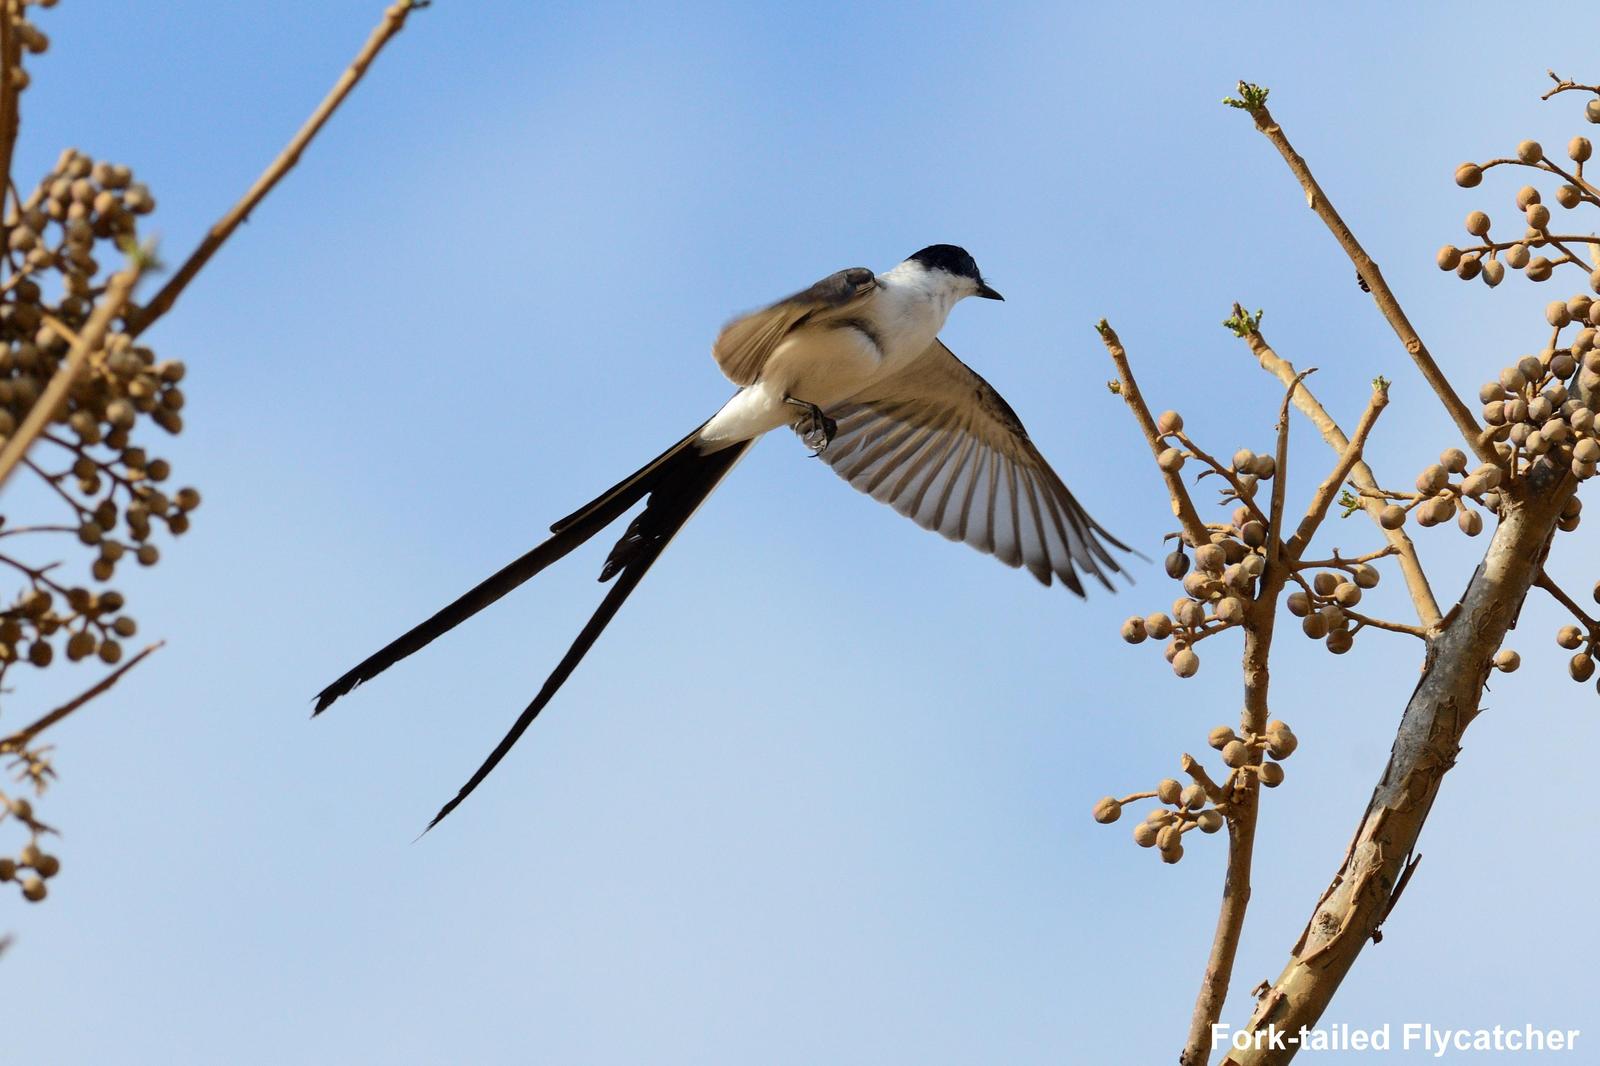 Fork-tailed Flycatcher Photo by Laurence Pellegrini